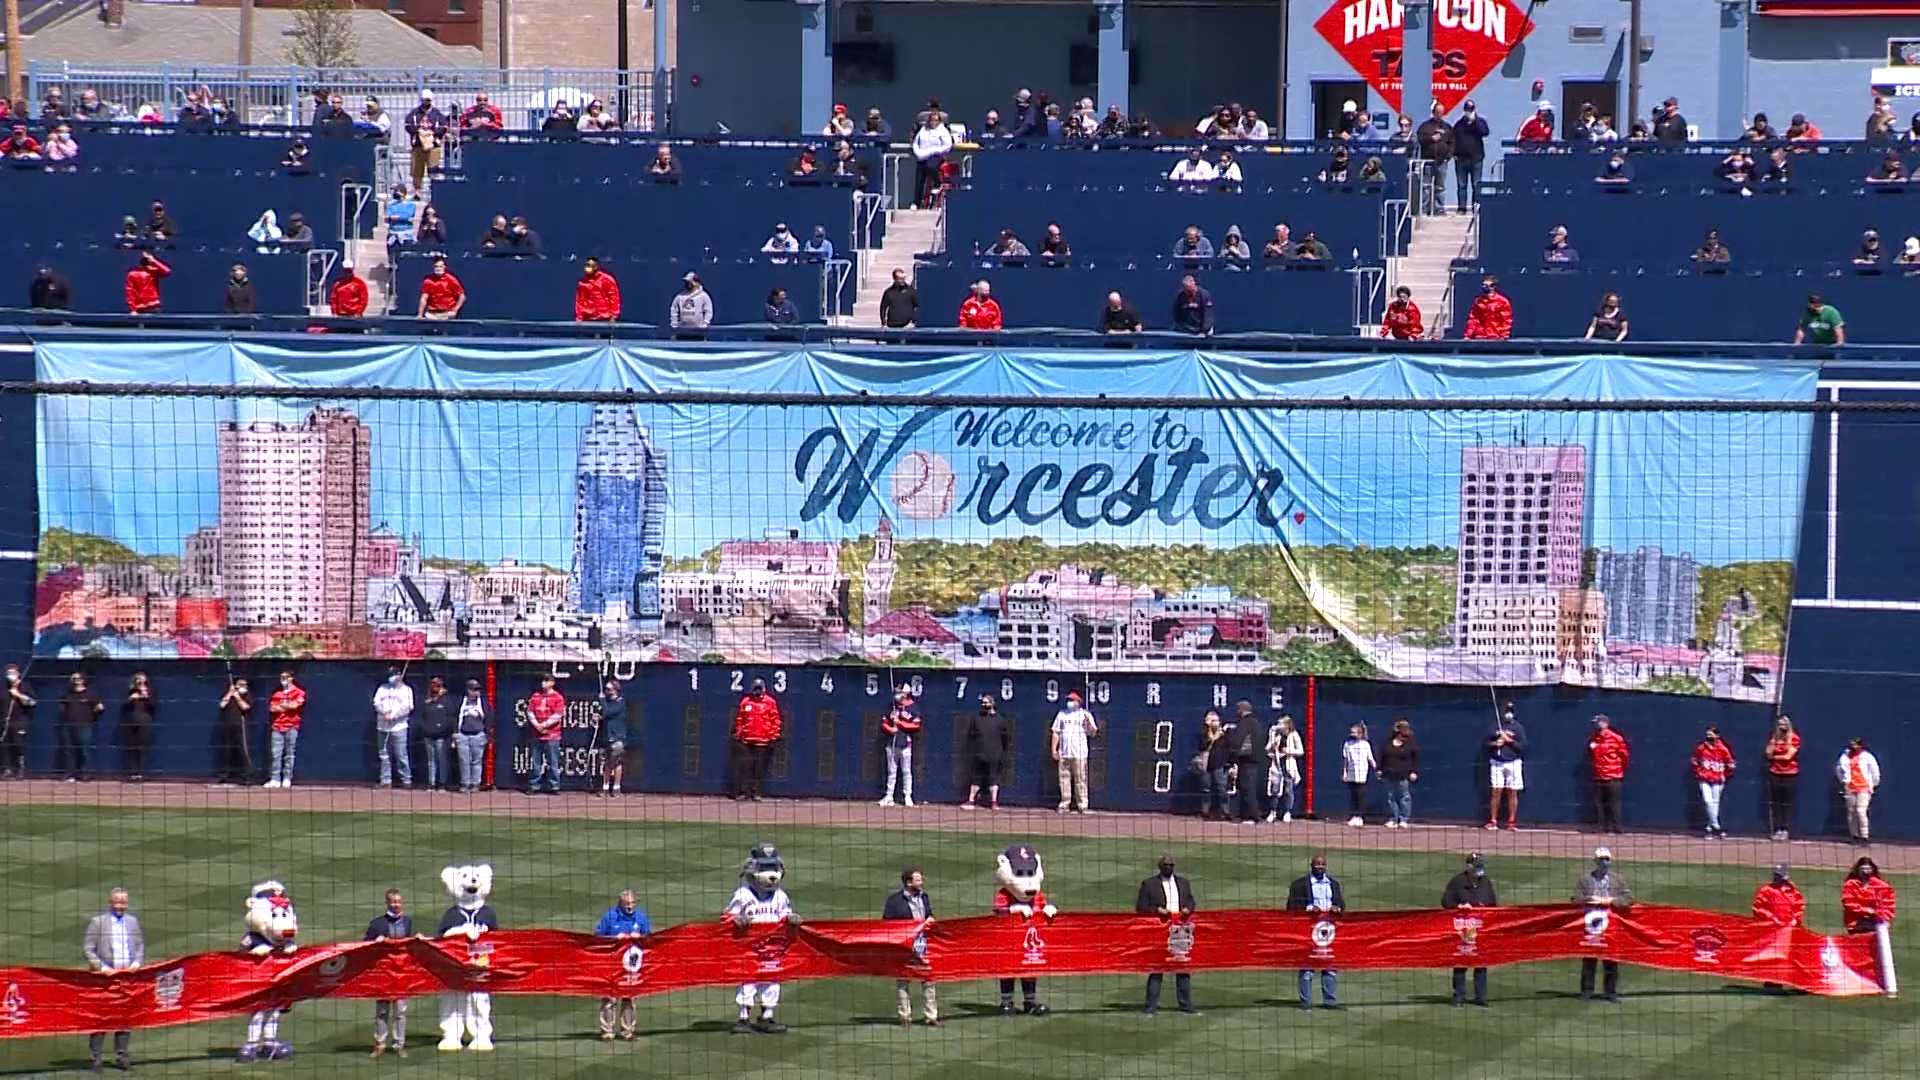 Worcester Red Sox win home opener at Polar Park behind 4 homers